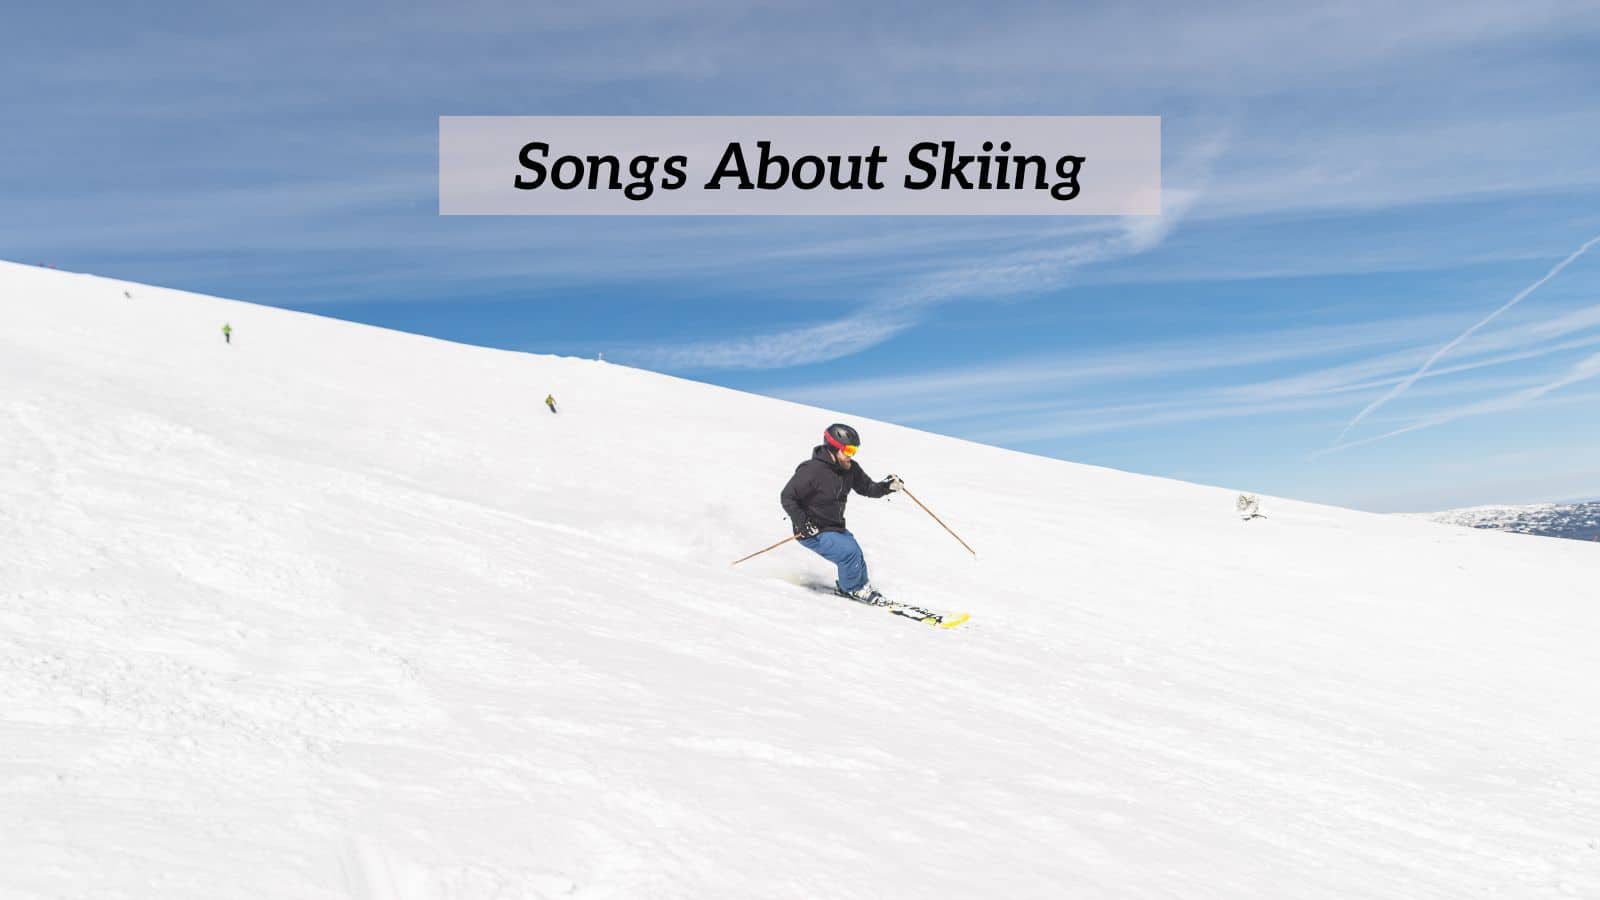 Songs About Skiing